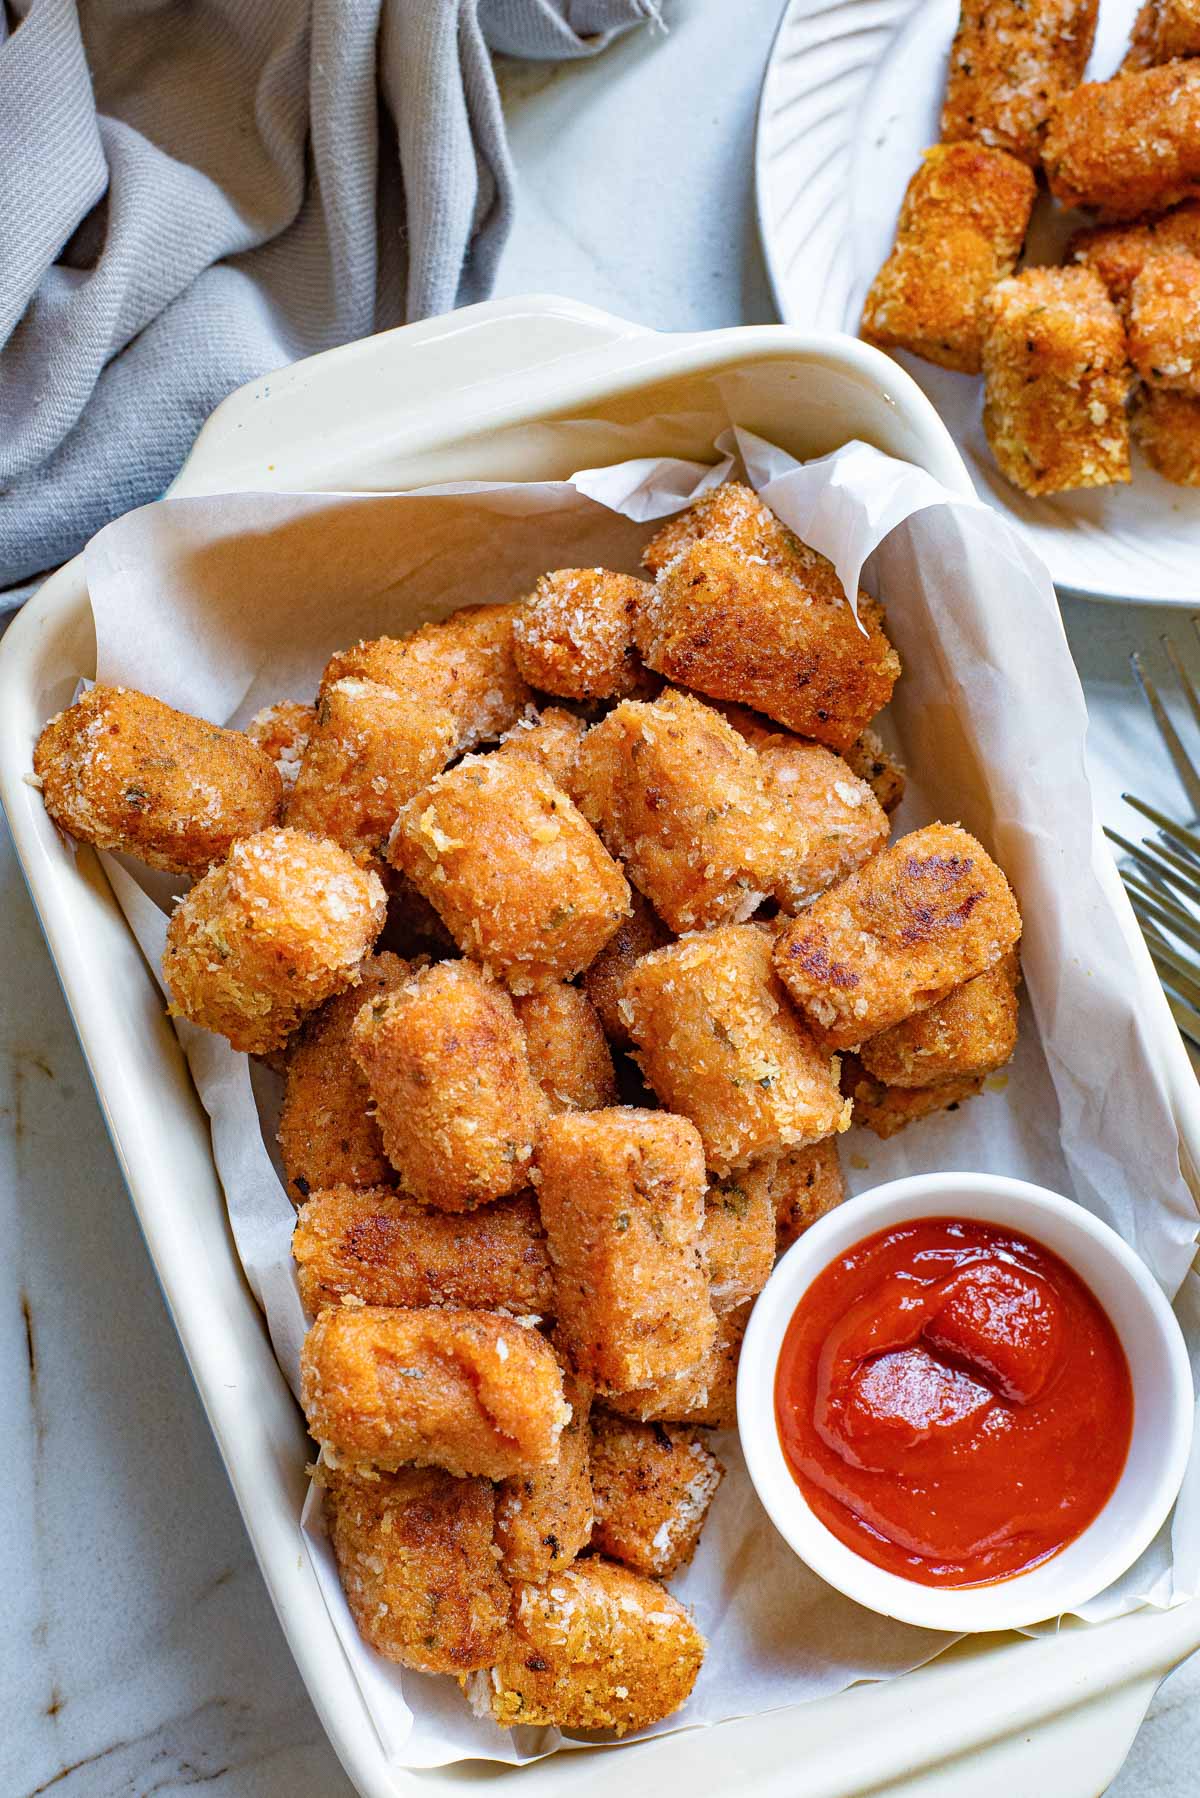 sweet potato tater tots in a baking dish with a side of ketchup